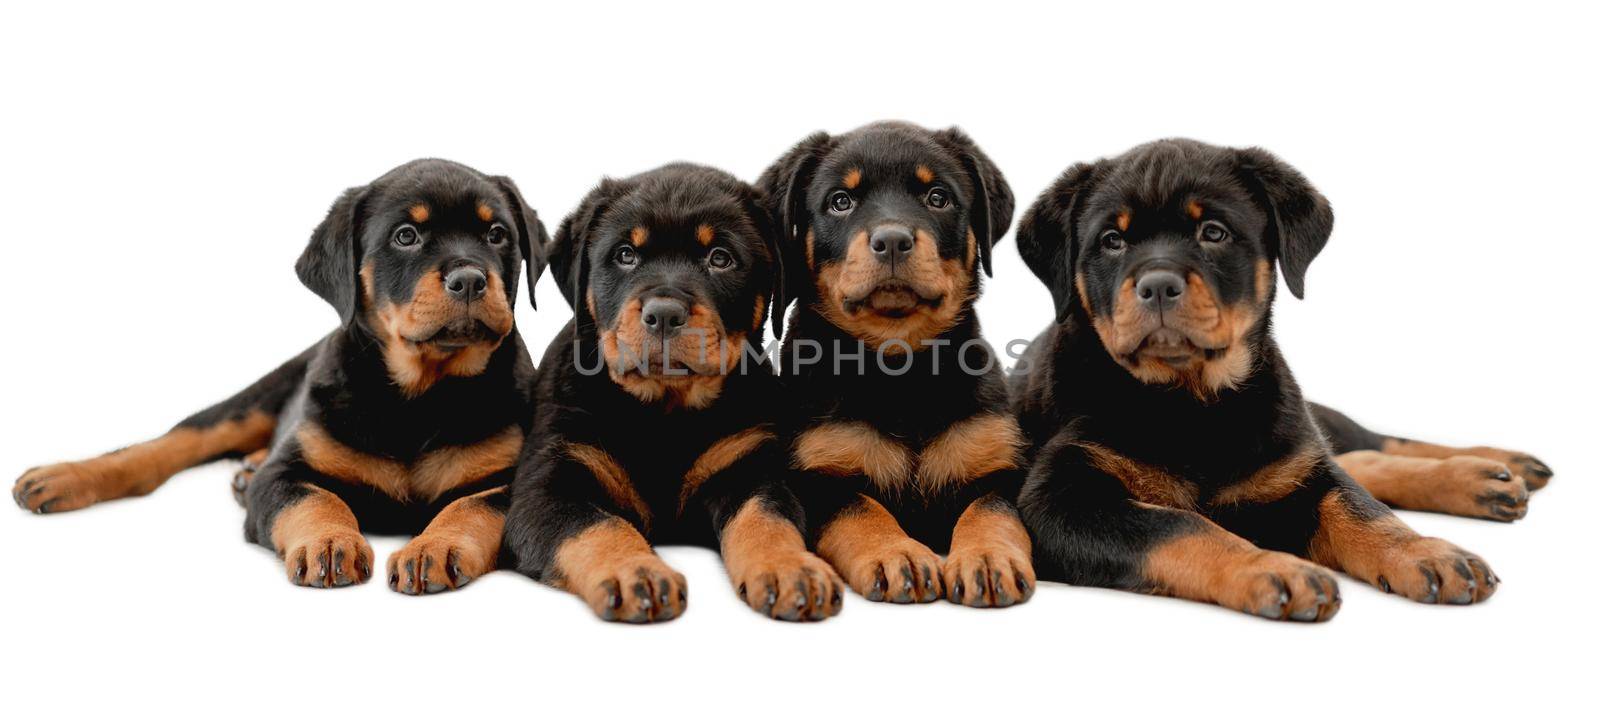 Rottweiler puppies isolated on white backgroung by tan4ikk1